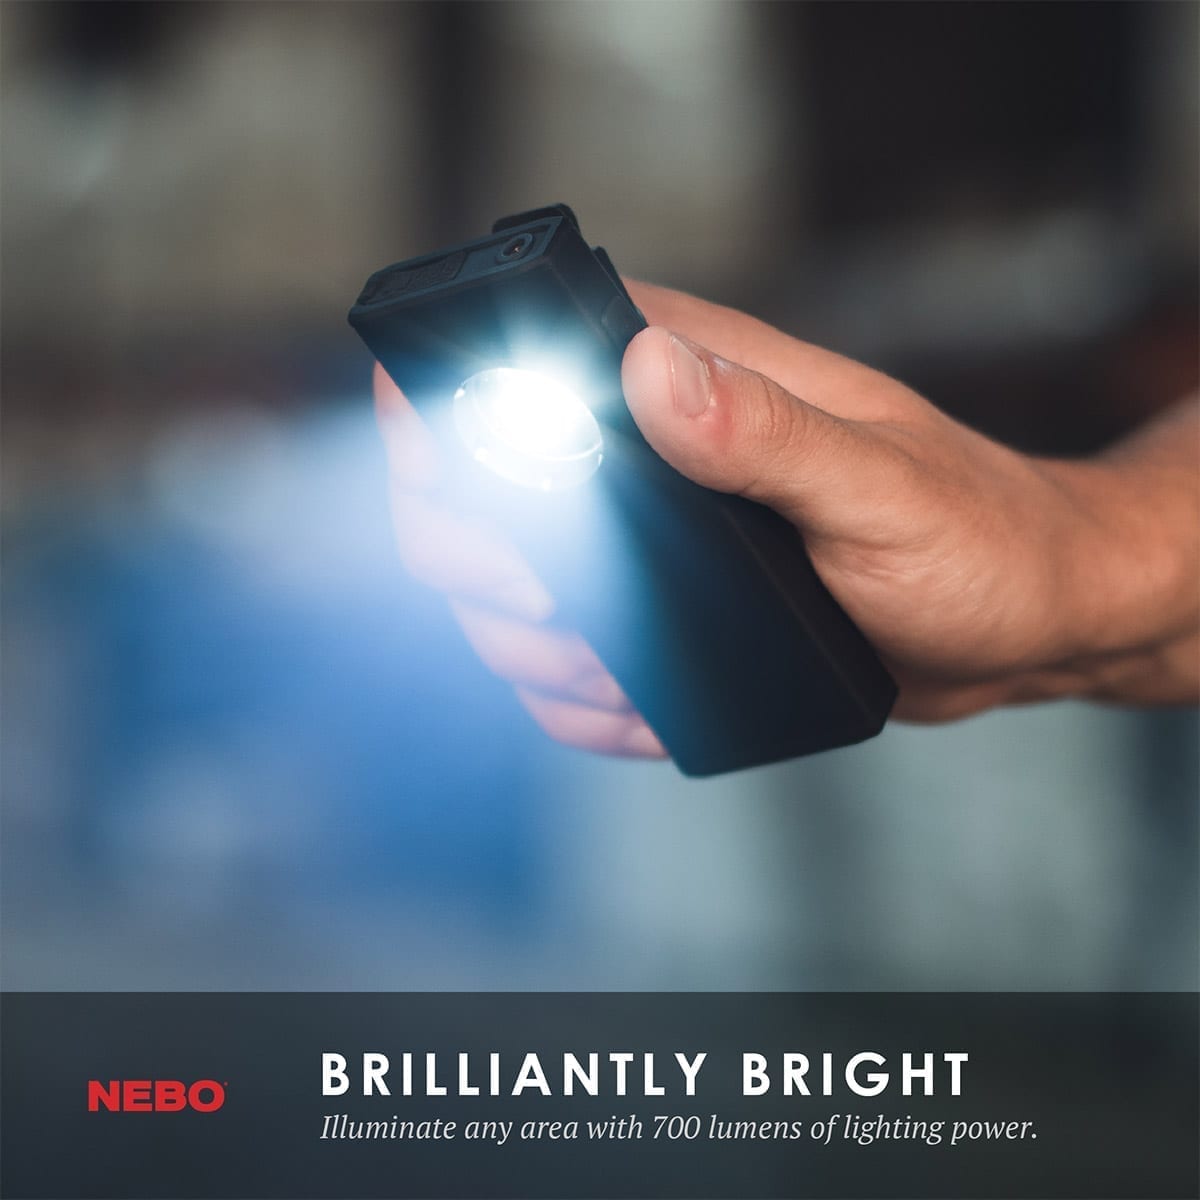 At Nebo Tools, we continually innovate so that we can offer the highest quality LED lighting products at the best price. The SLIM+ is a thin, ergonomic rechargeable 700 lumen pocket light with a class 2 EU certified red laser pointer and an emergency power bank for your USB powered devices. Equipped with full dimming and Power Memory Recall, the SLIM+ also features a detachable magnetic pocket clip, collapsible hanging hook and magnetic base for convenient hands-free lighting.